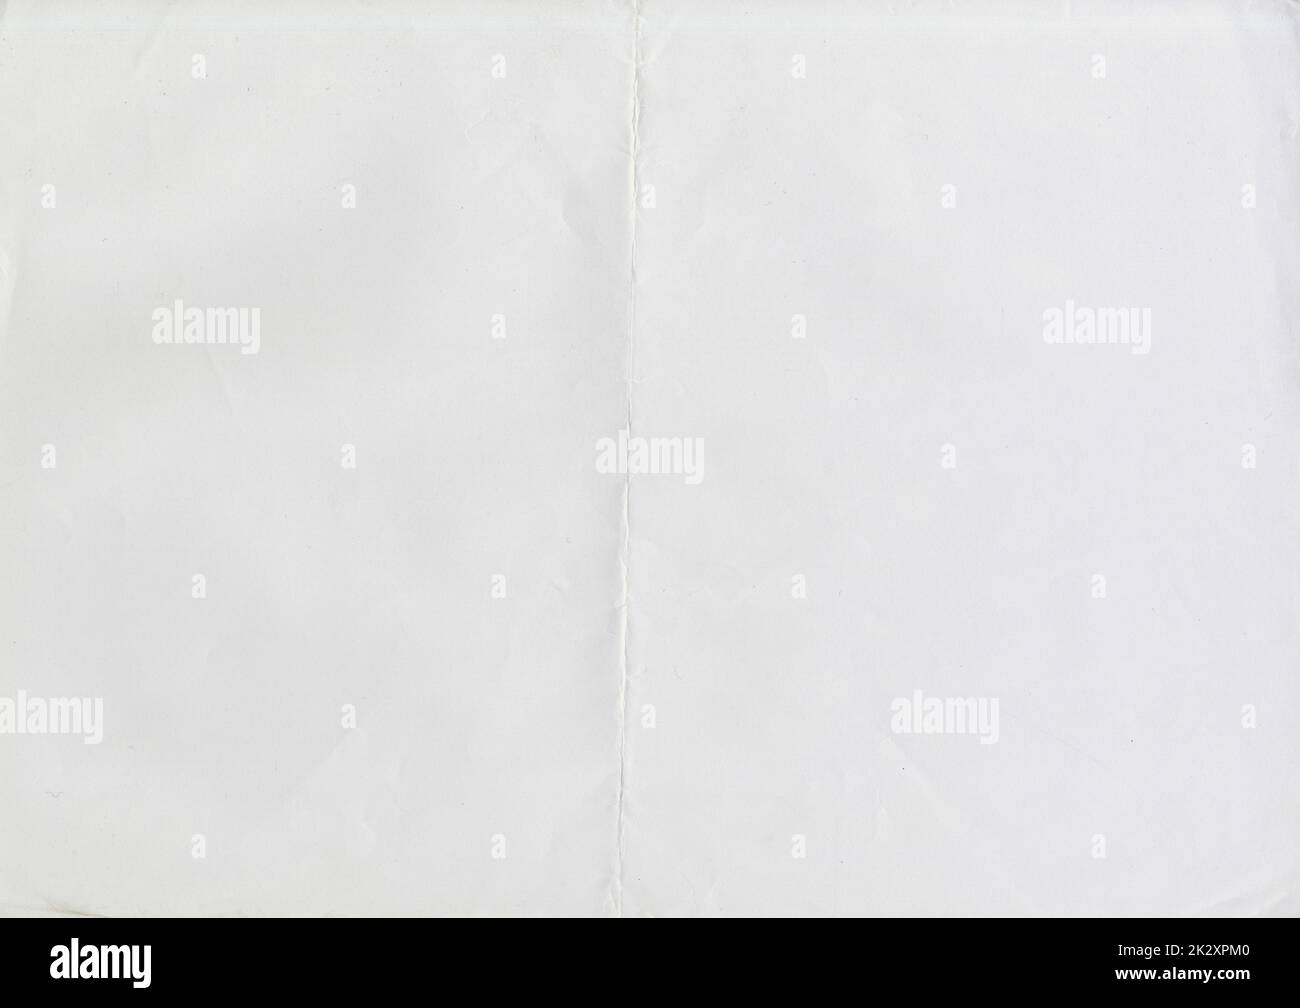 High resolution large image of white paper texture background scan folded in half, soft fine grain uncoated paper for water colors with copy space for text material mockup or presentation wallpaper Stock Photo